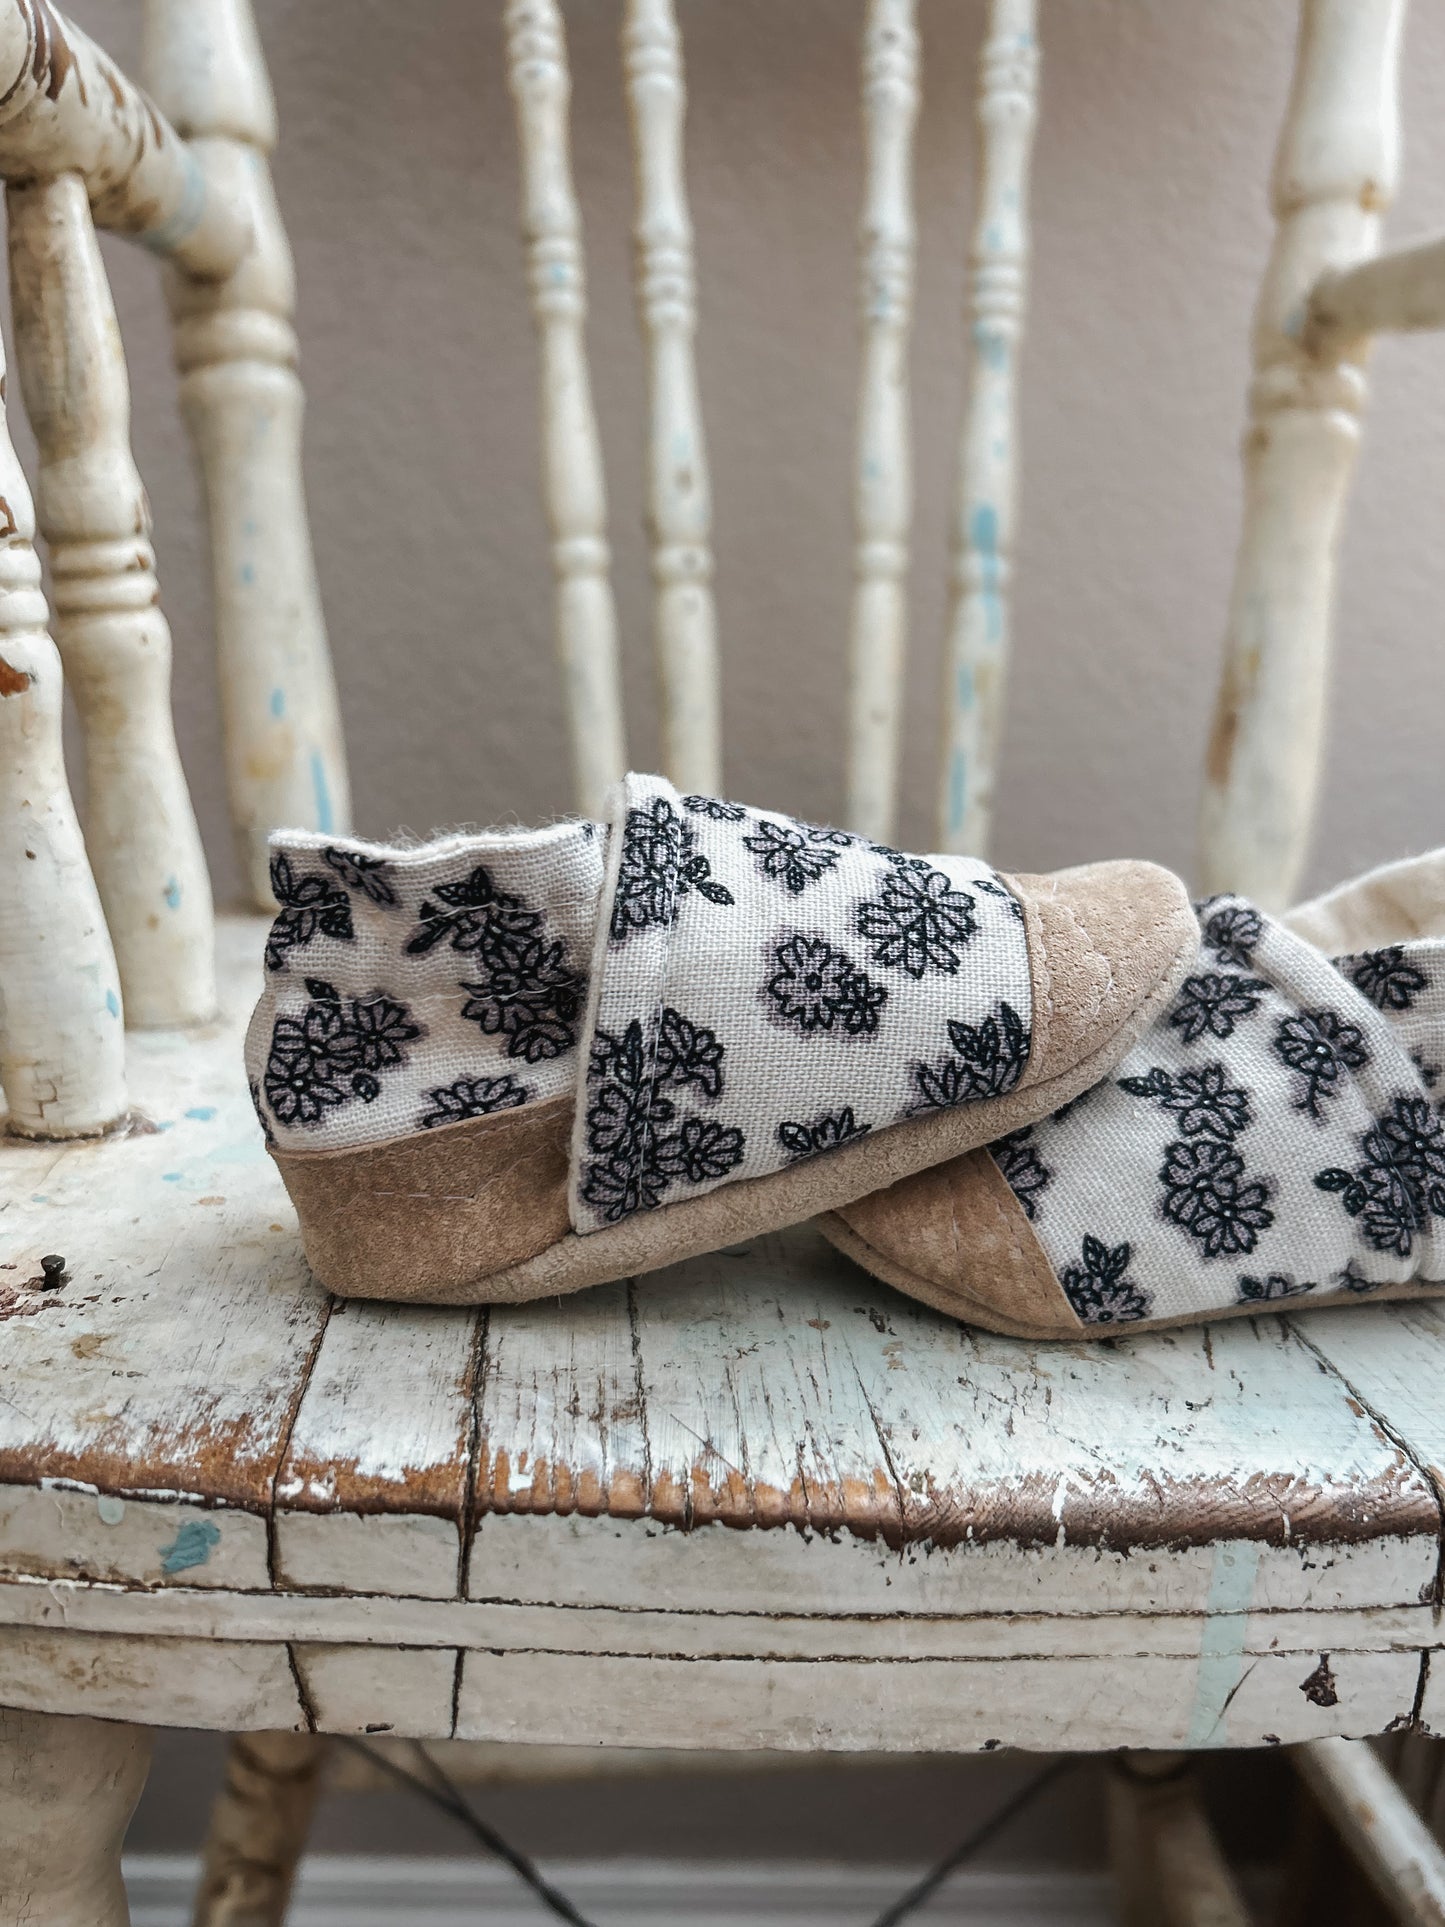 tiny flowers linen soft soled baby shoes